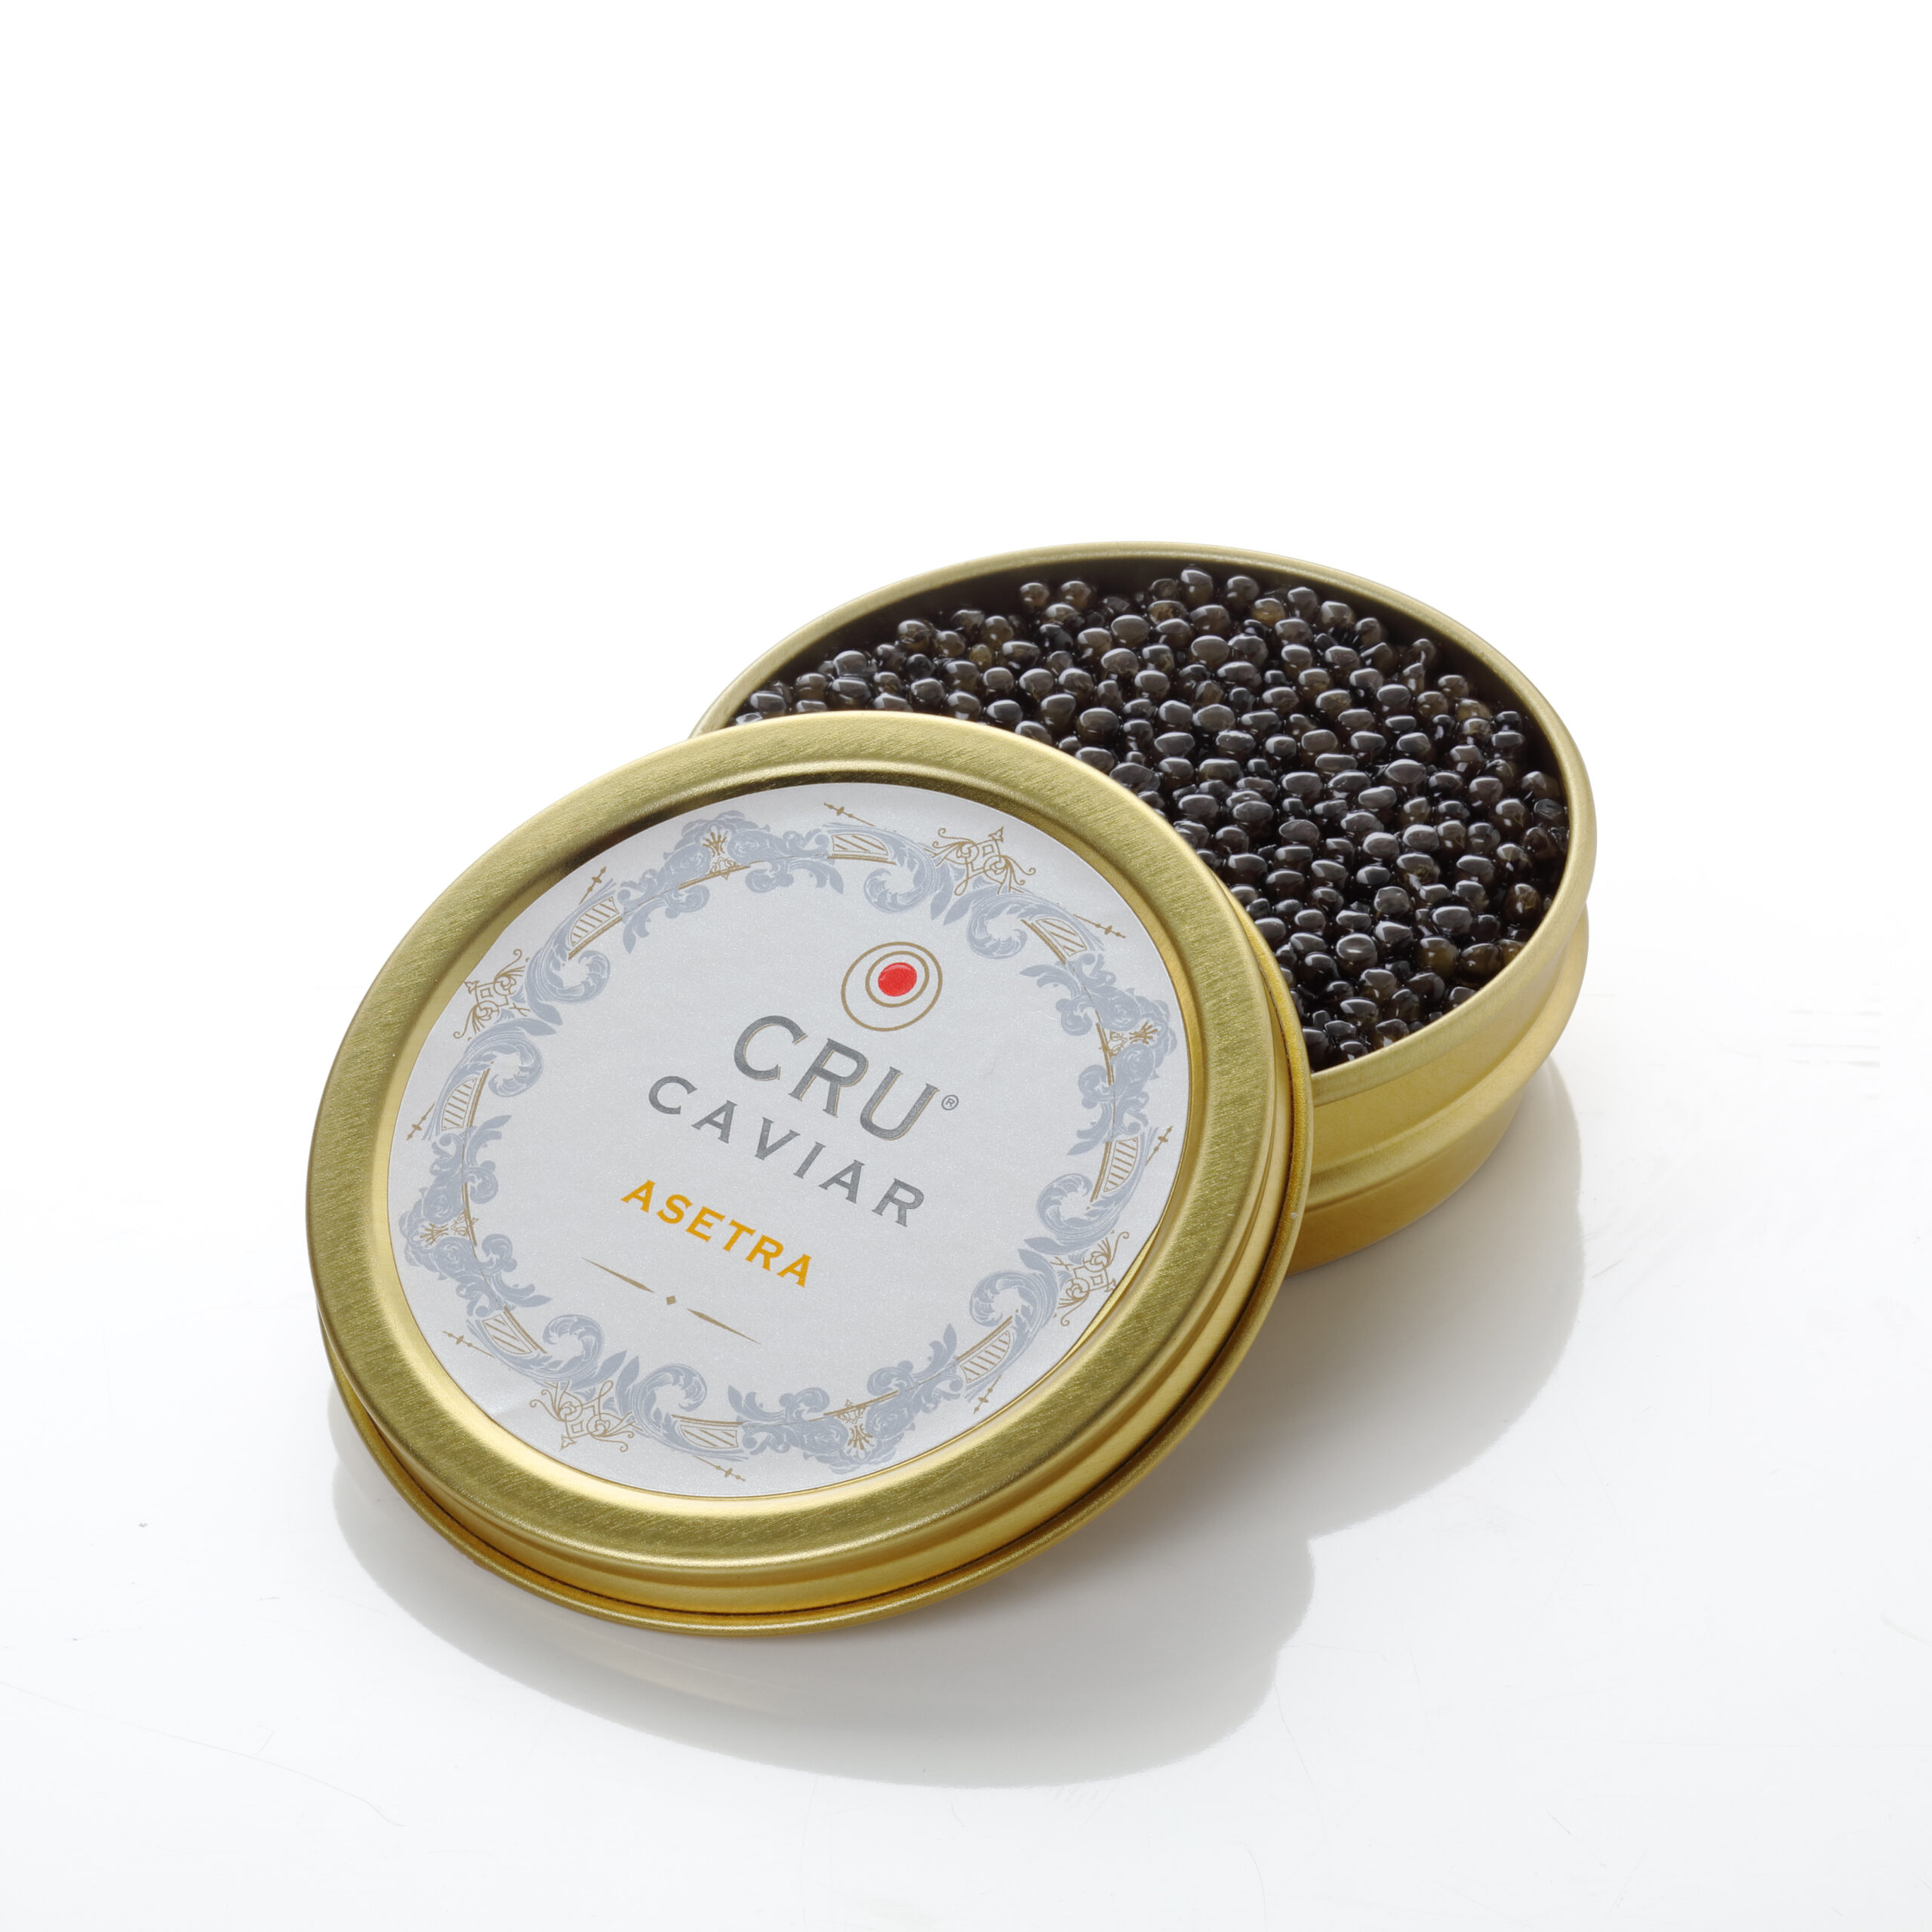 Caviale asetra